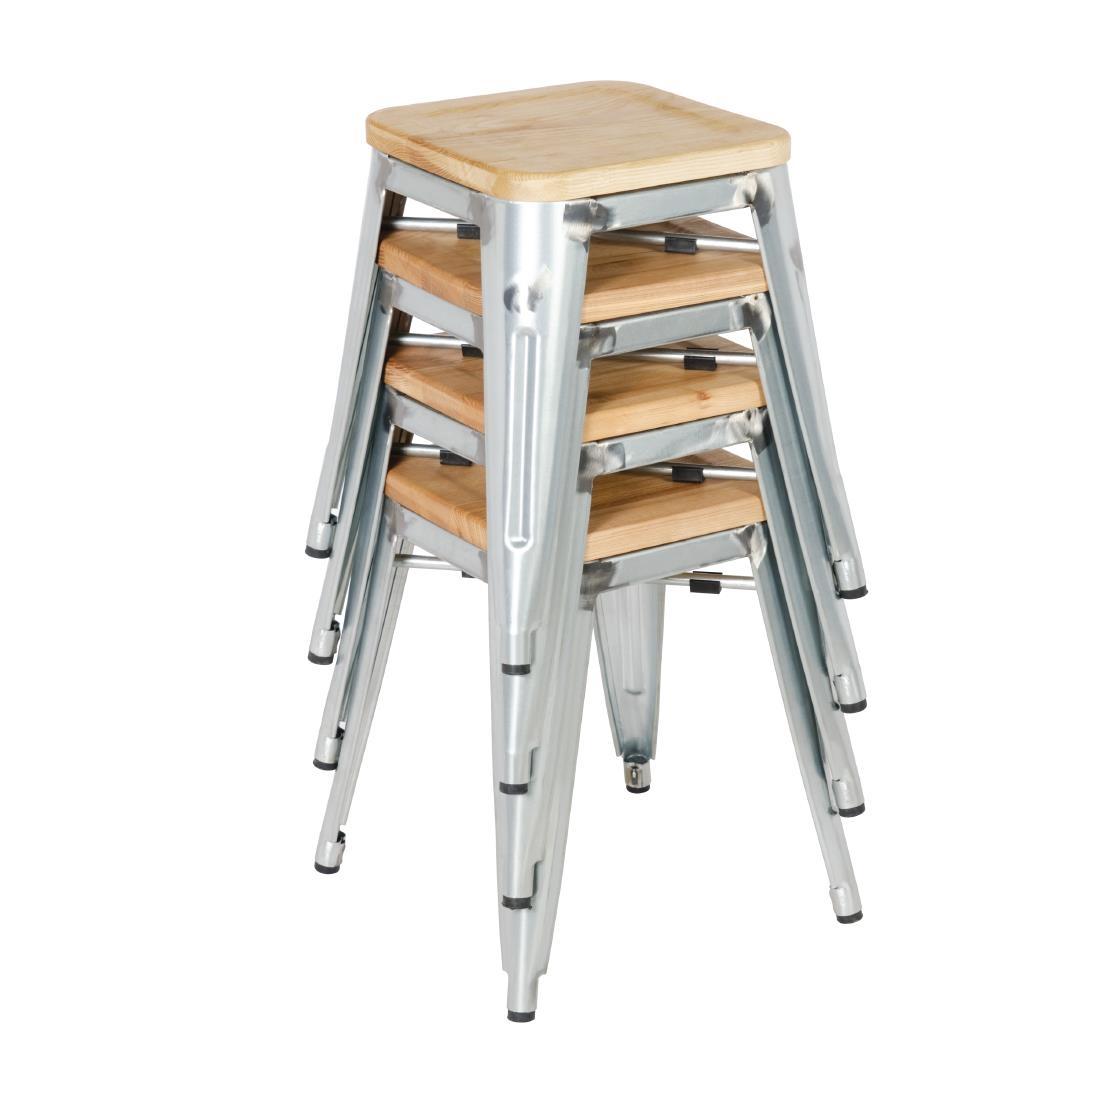 Bolero Bistro Low Stools with Wooden Seat Pad Galvanised Steel (Pack of 4) - GM634  - 4